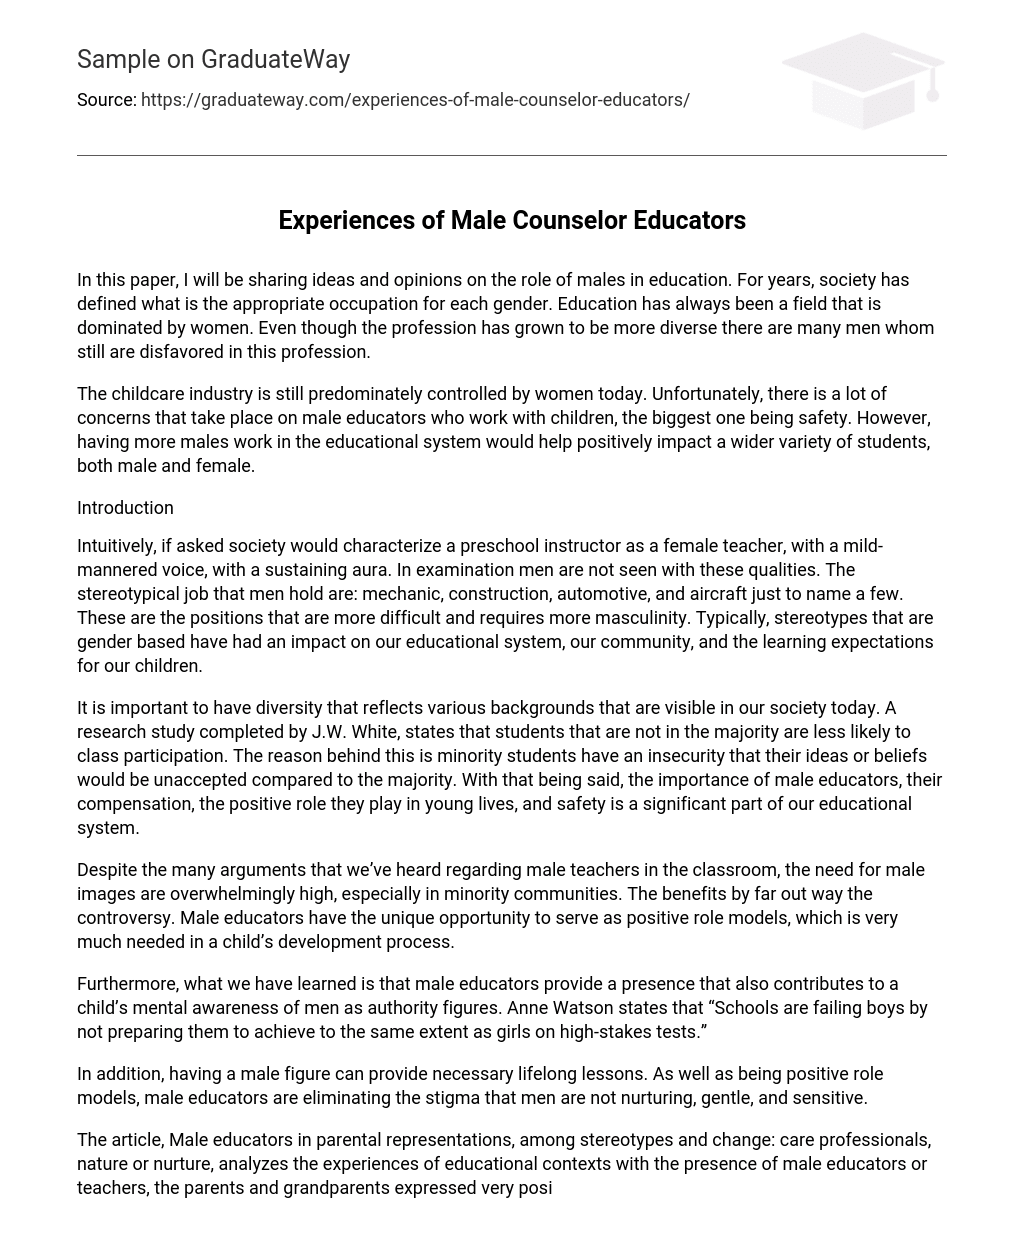 Experiences of Male Counselor Educators